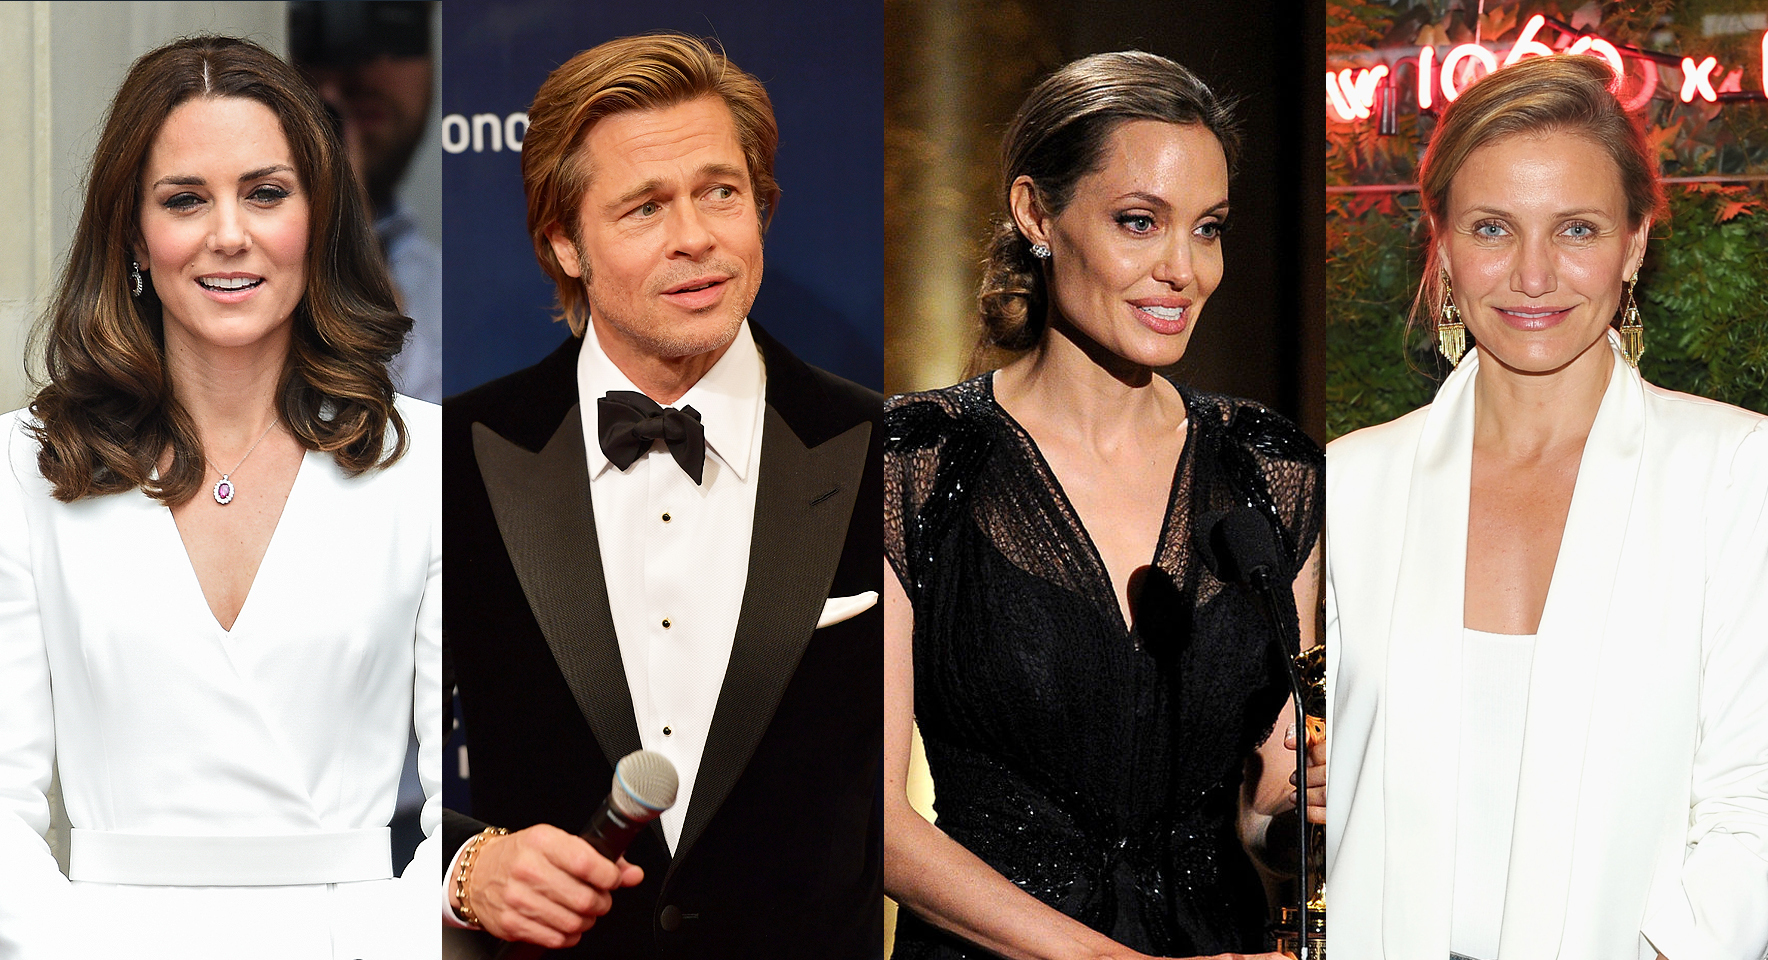 Kate Middleton, Brad Pitt, Angelina Jolie, and Cameron Diaz | Source: Getty Images